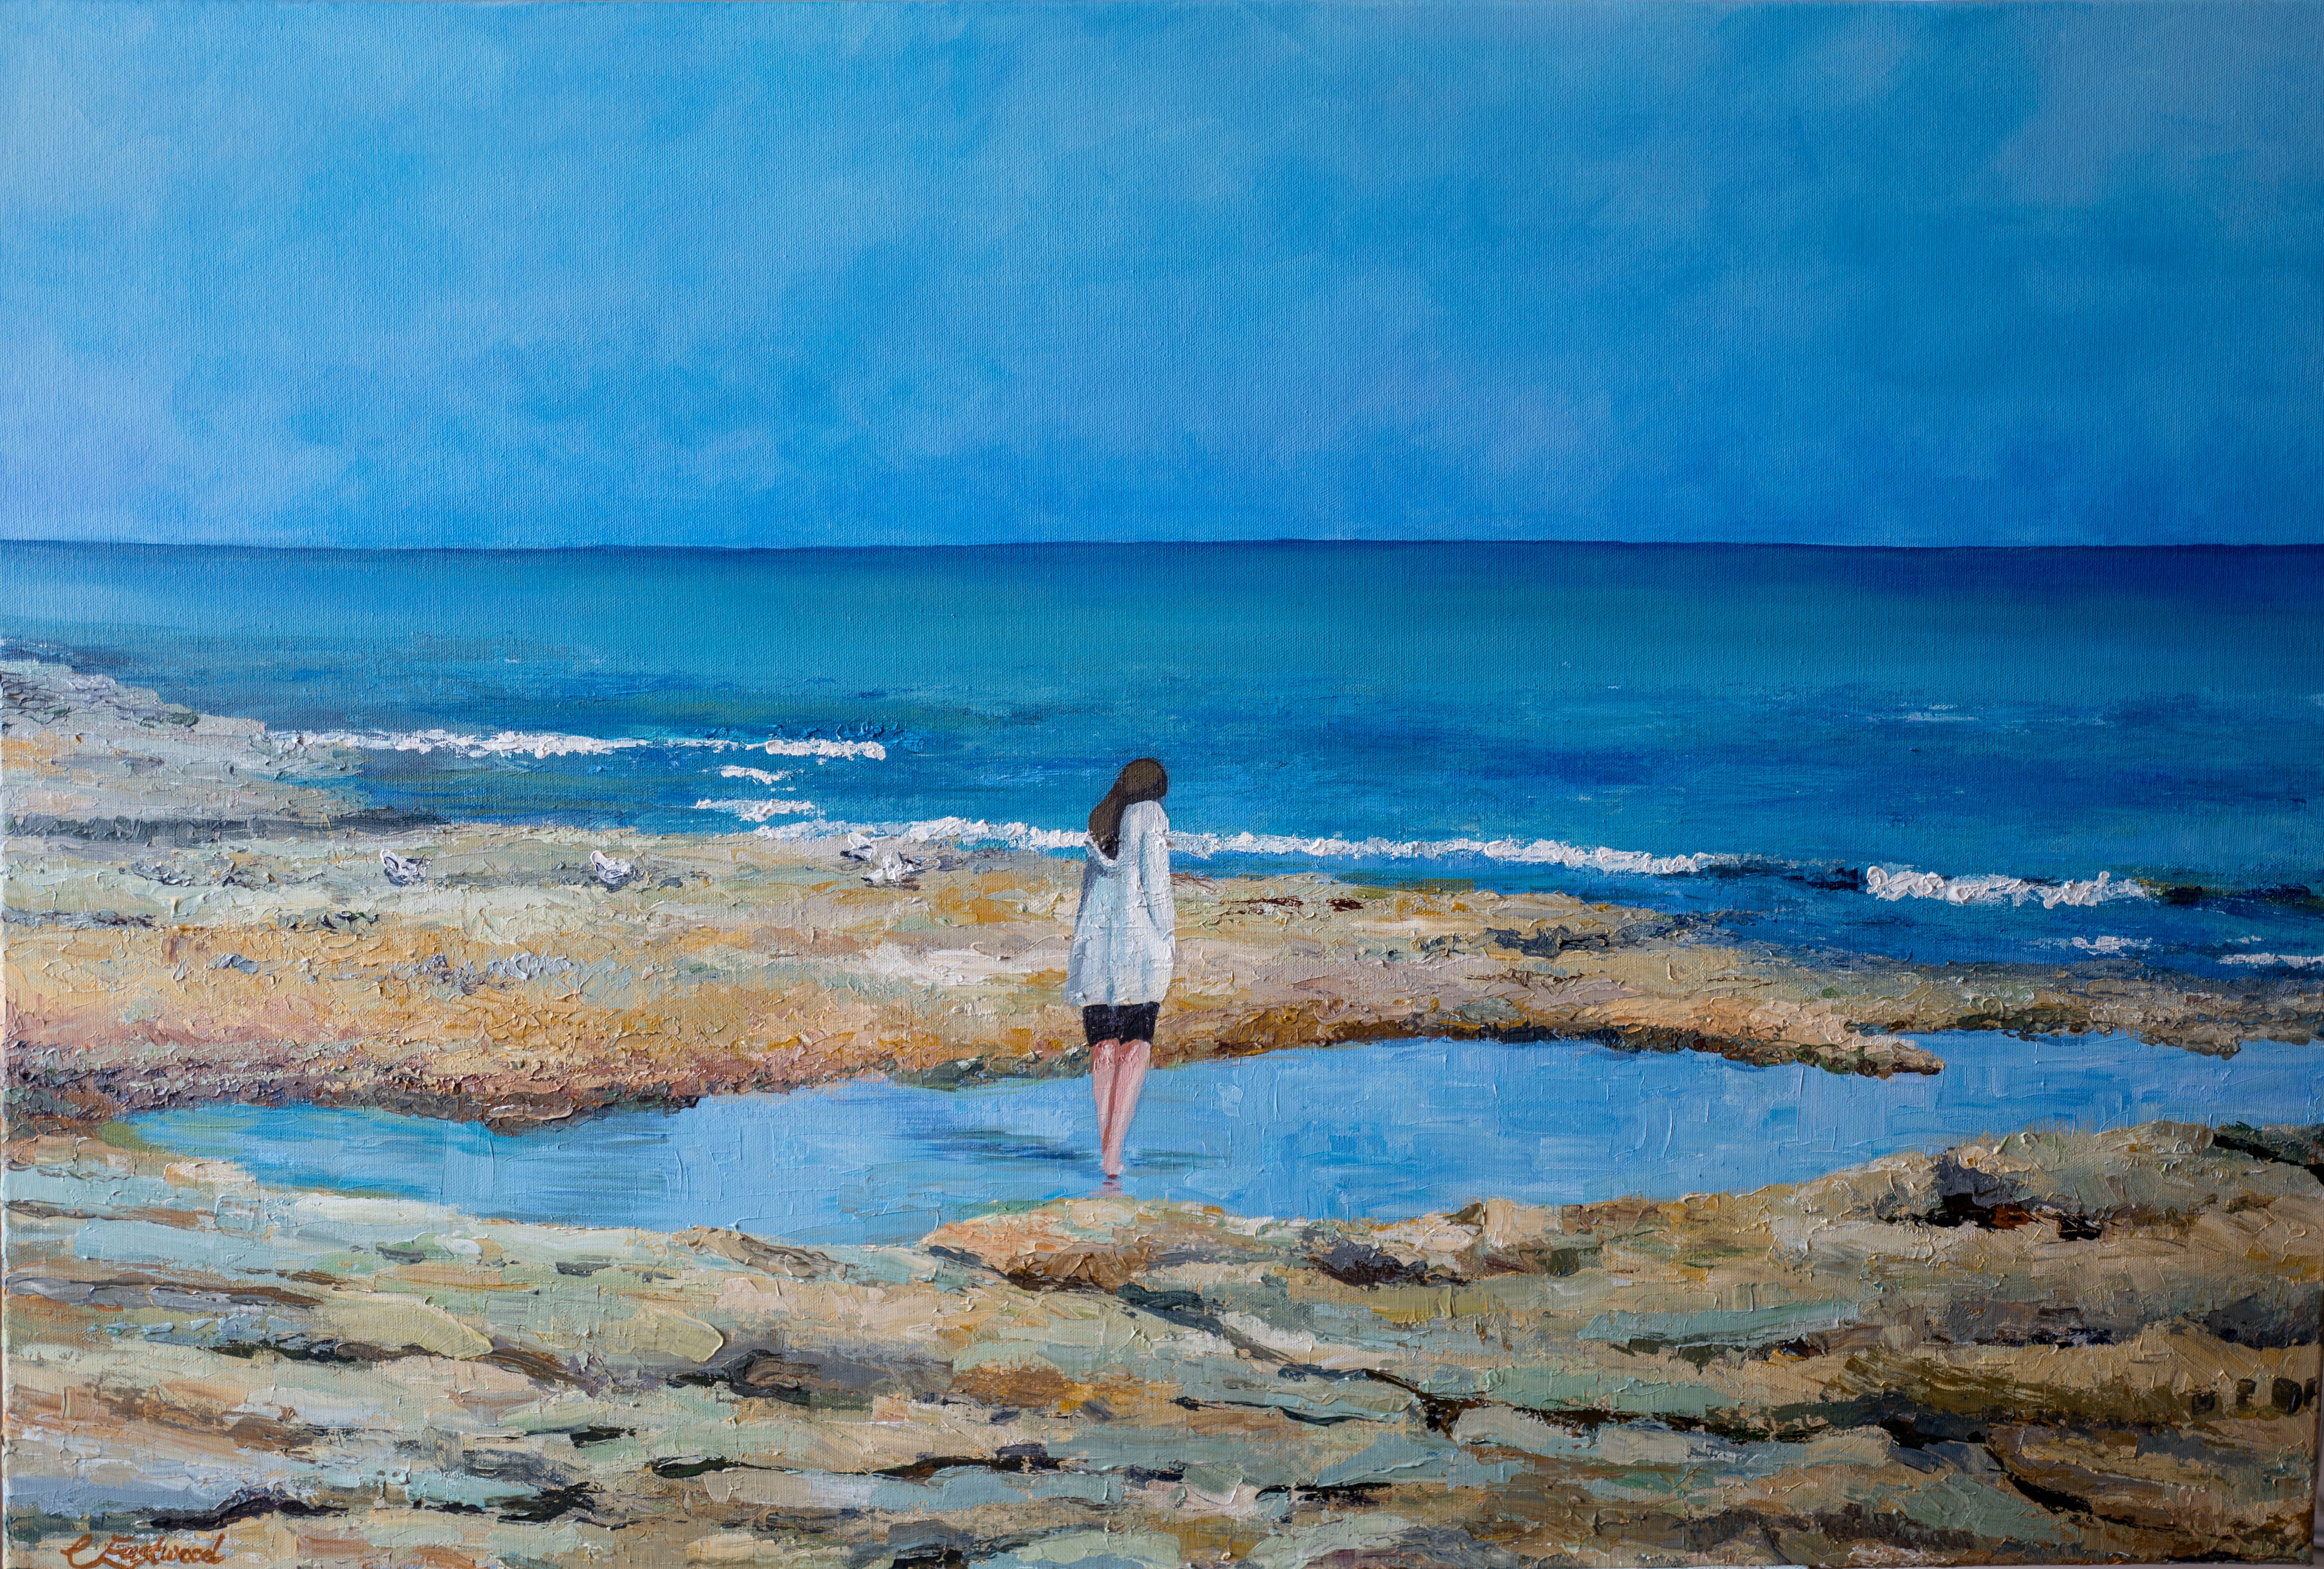  My paintings of seascapes often include people; I am interested in our relationship with that environment. For some it is activity (sailing, surfing, sandcastles) for others it is contemplation and relaxation. It is a place where families can come together or individuals spend time alone.